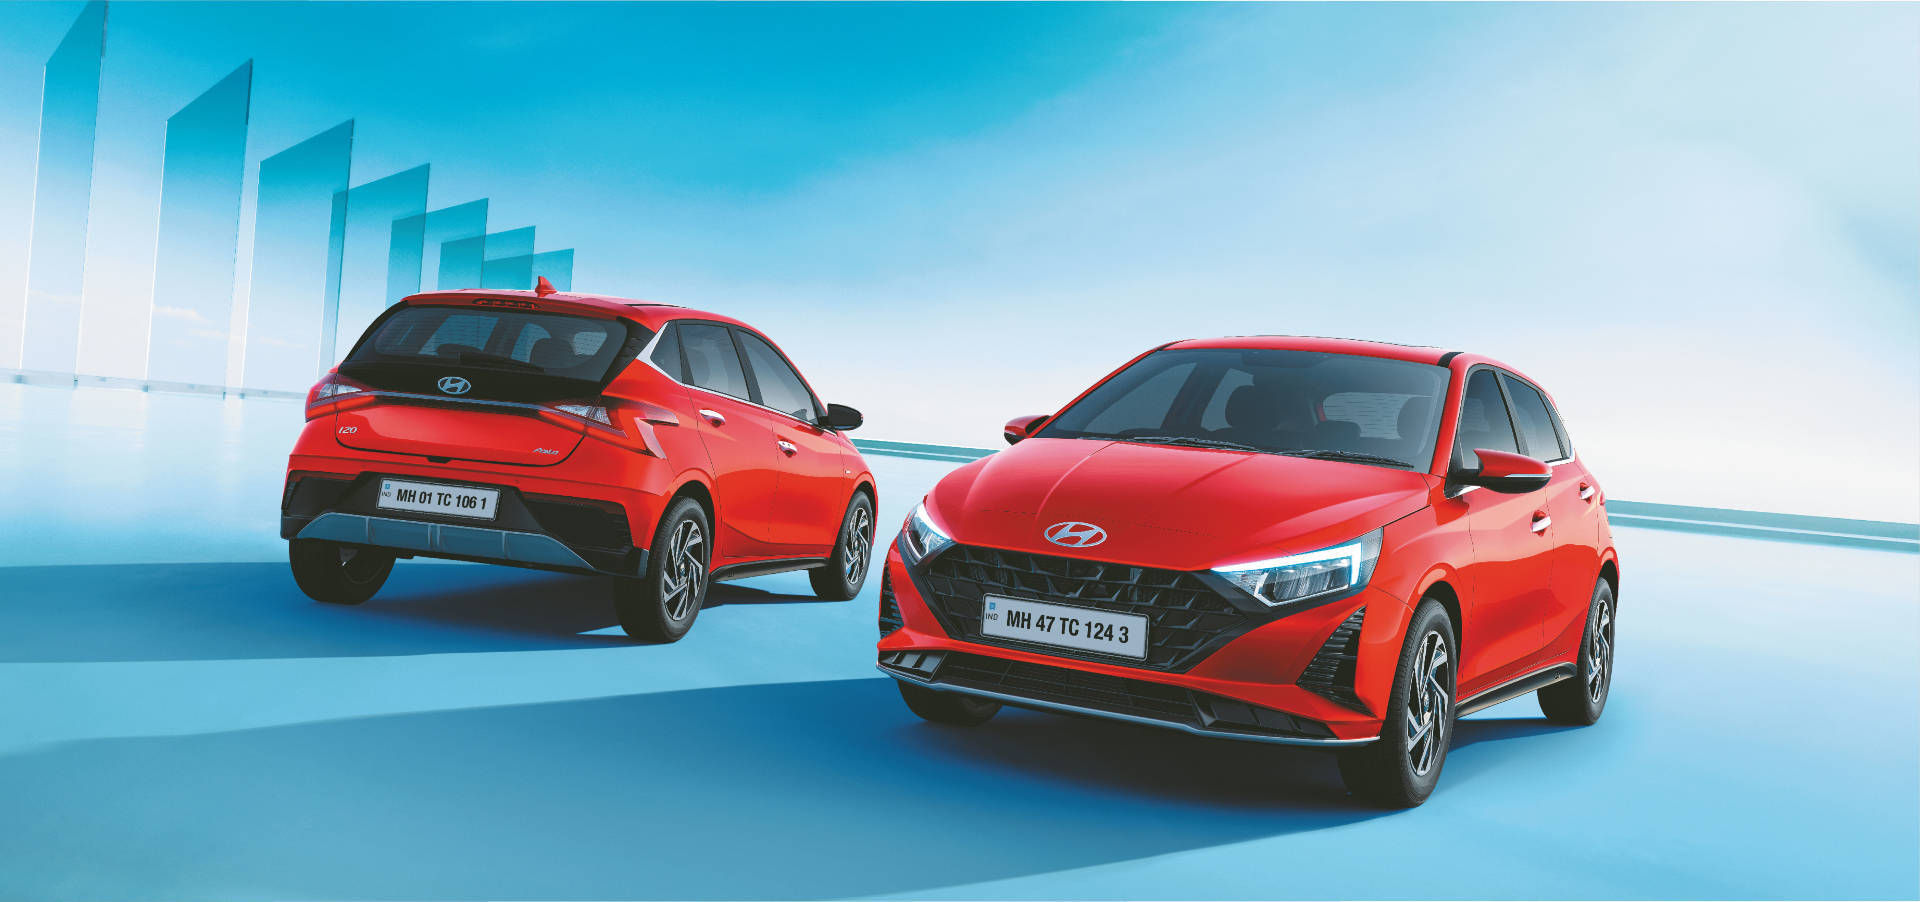 2023 Hyundai i20 facelift launched; prices start at Rs 6.99 lakh